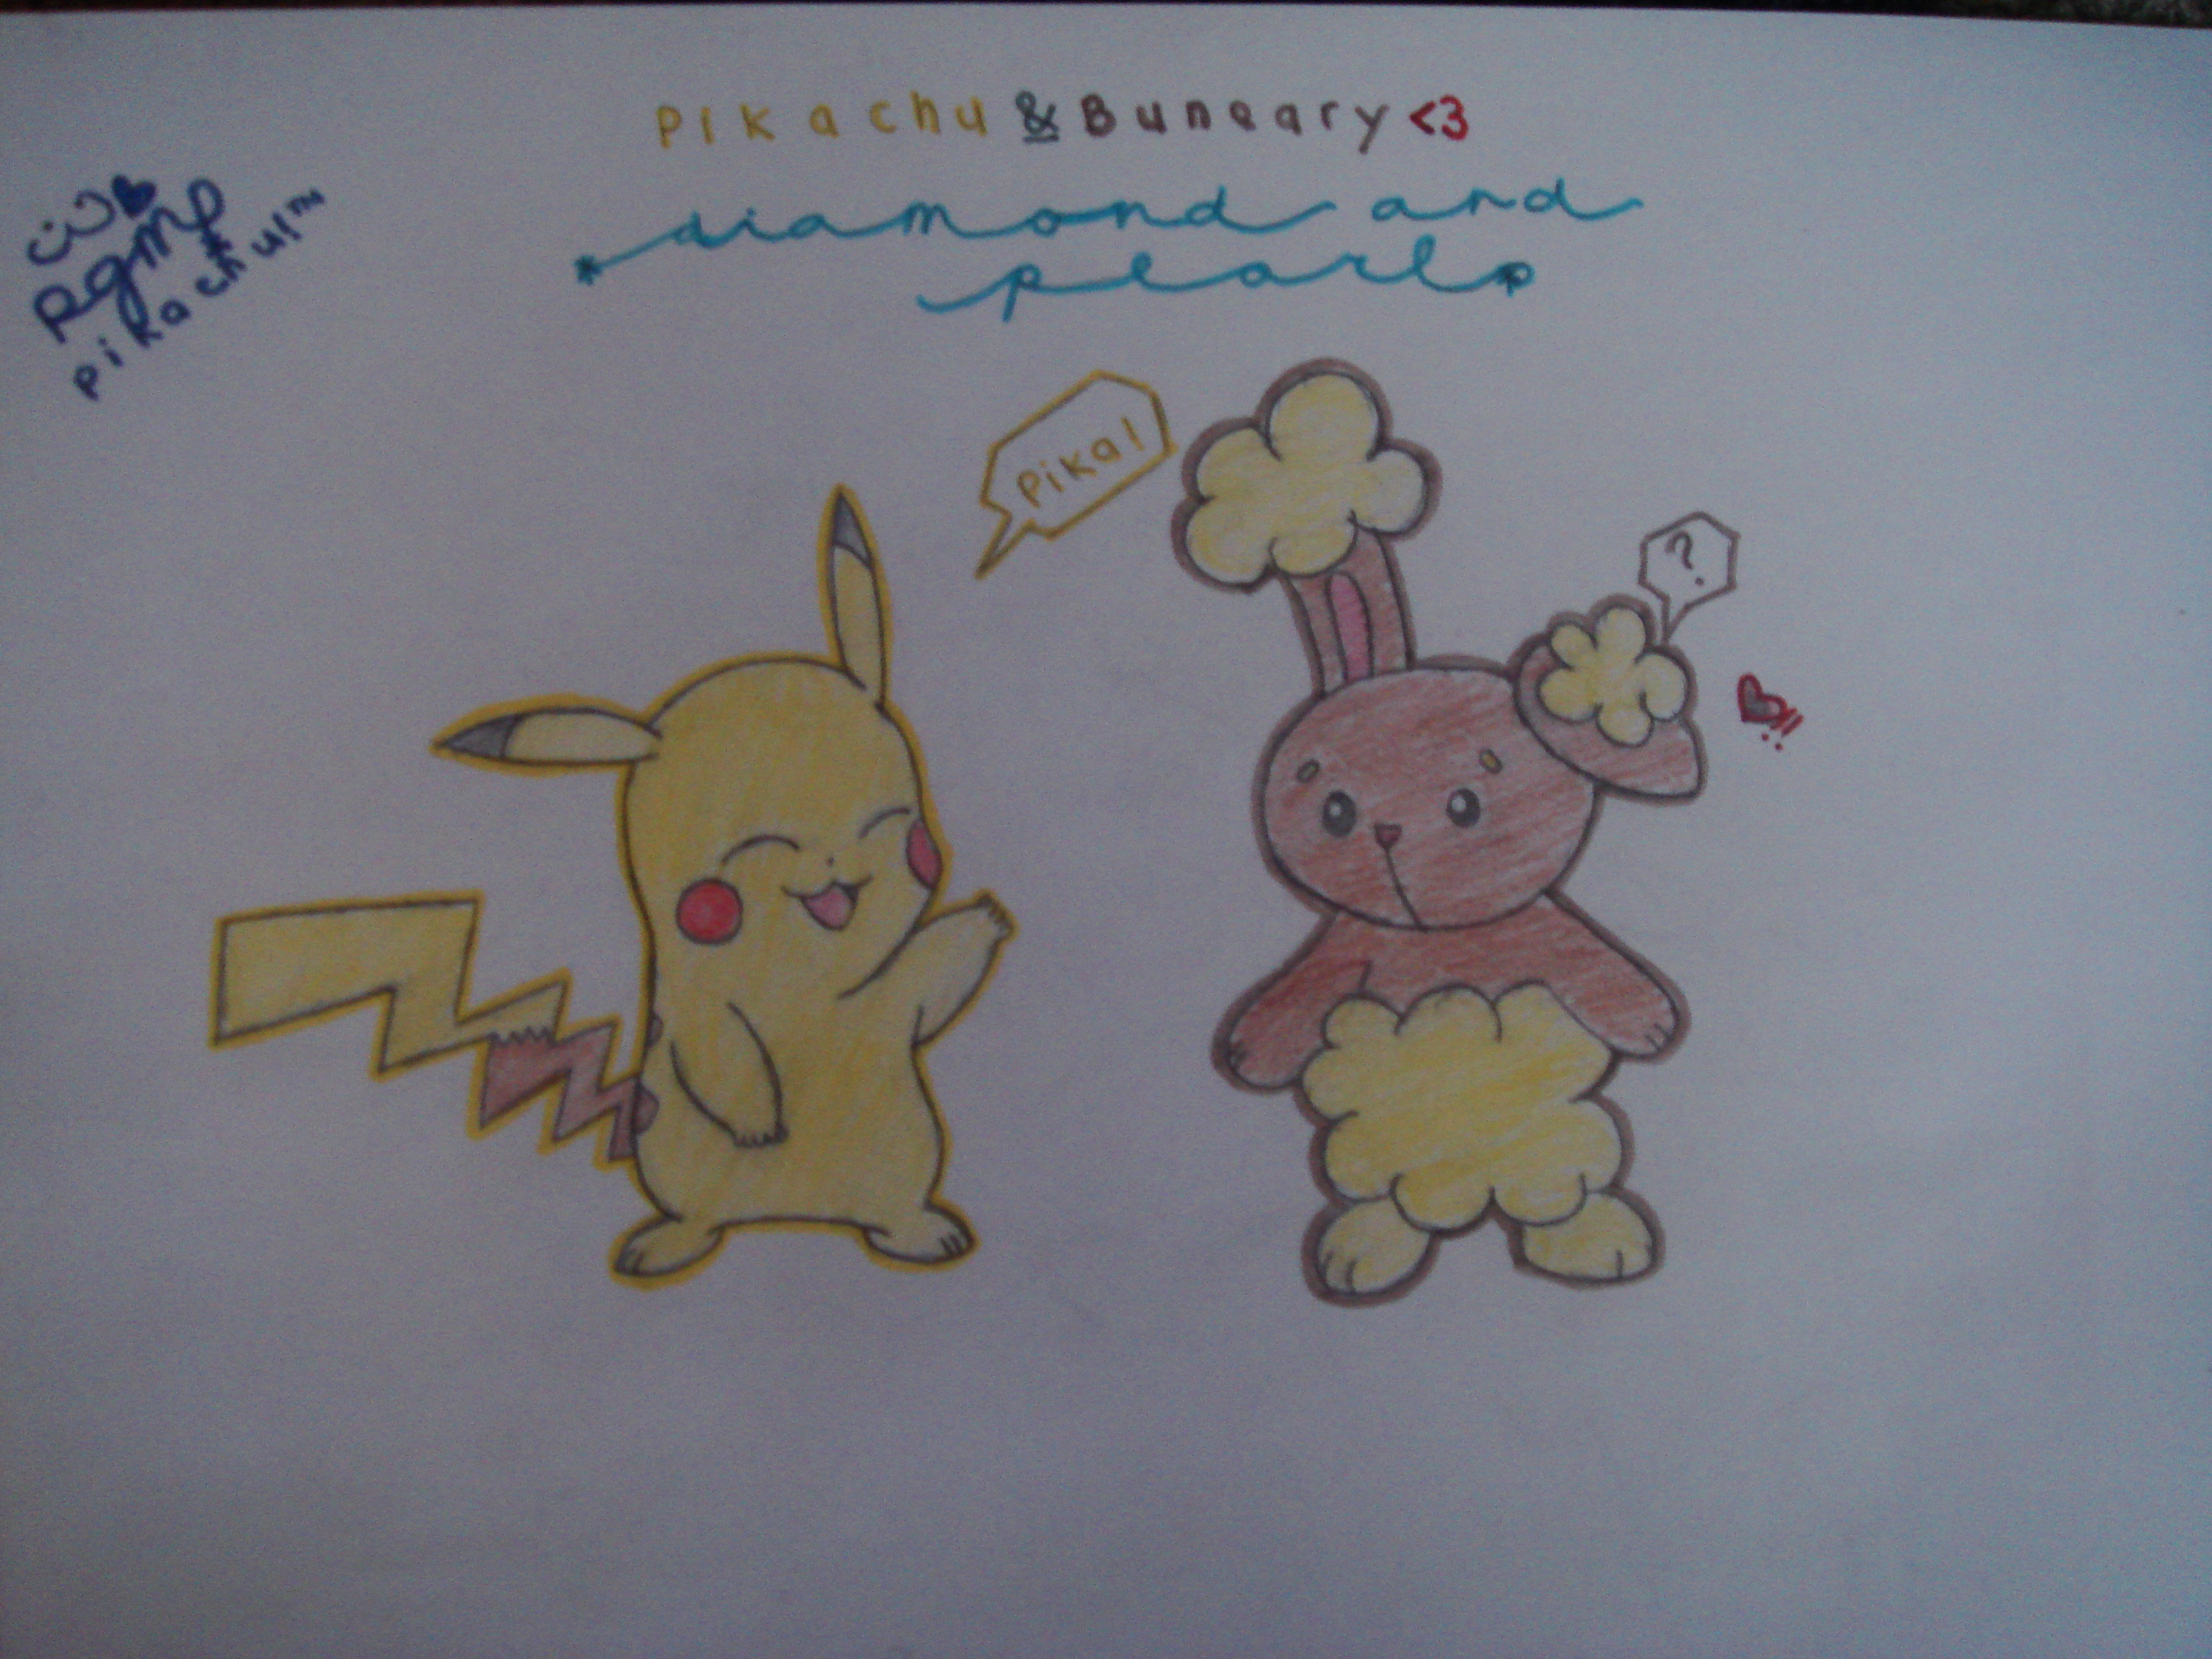 _pikachu_and_buneary__by_pichusister.jpg